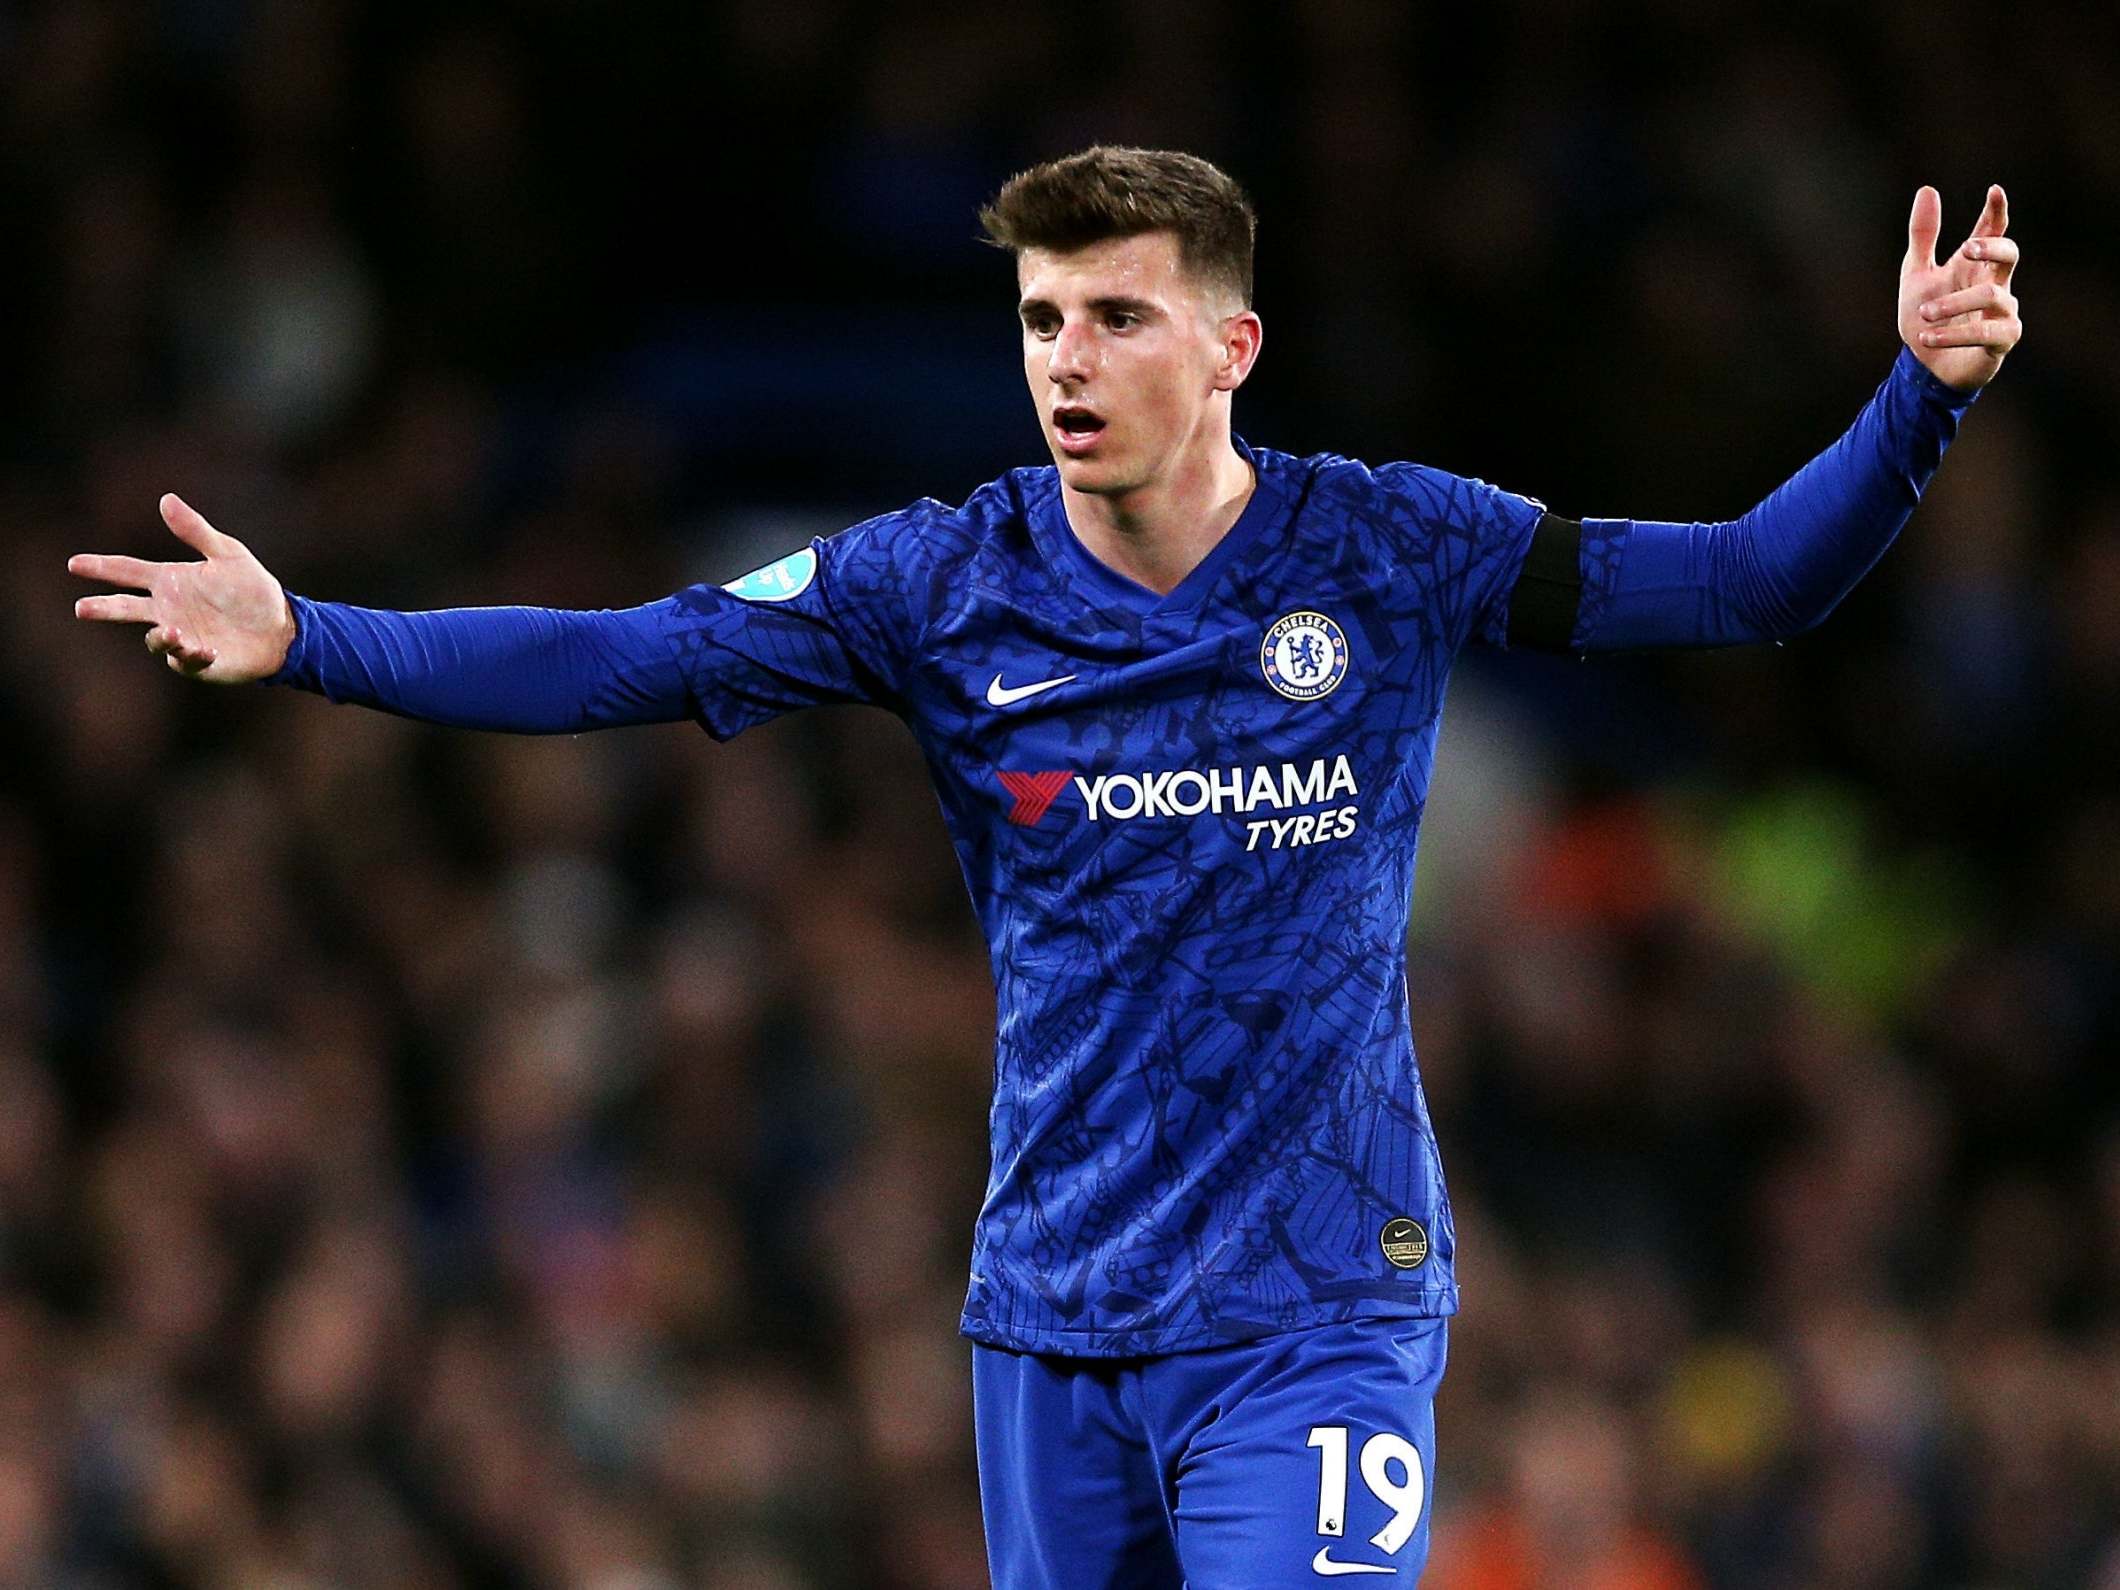 Mason Mount will be reminded of his responsibilities by Chelsea after breaking self-isolation